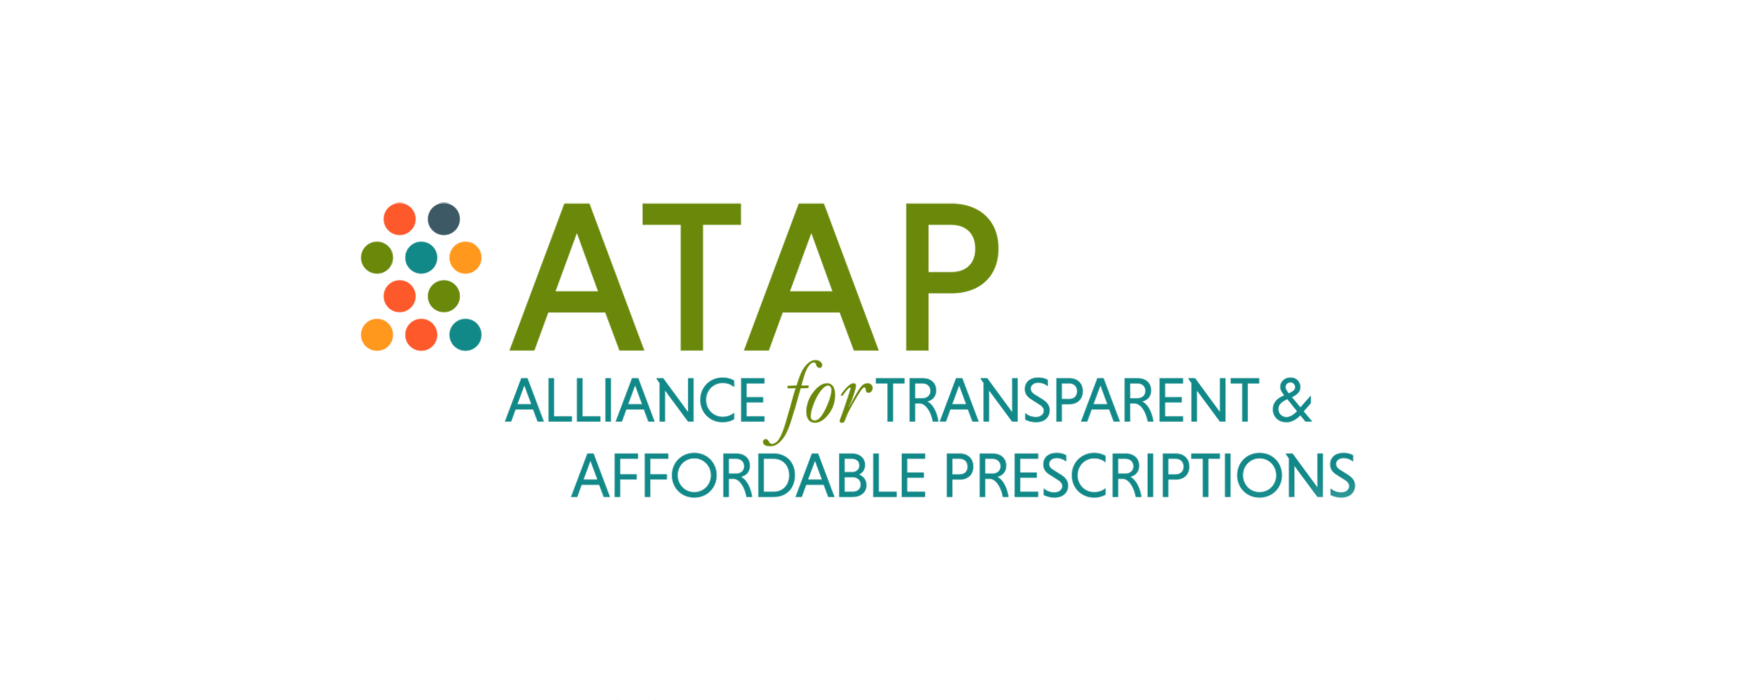 ATAP Applauds Virginia in Becoming First State to Pass PBM Legislation This Session